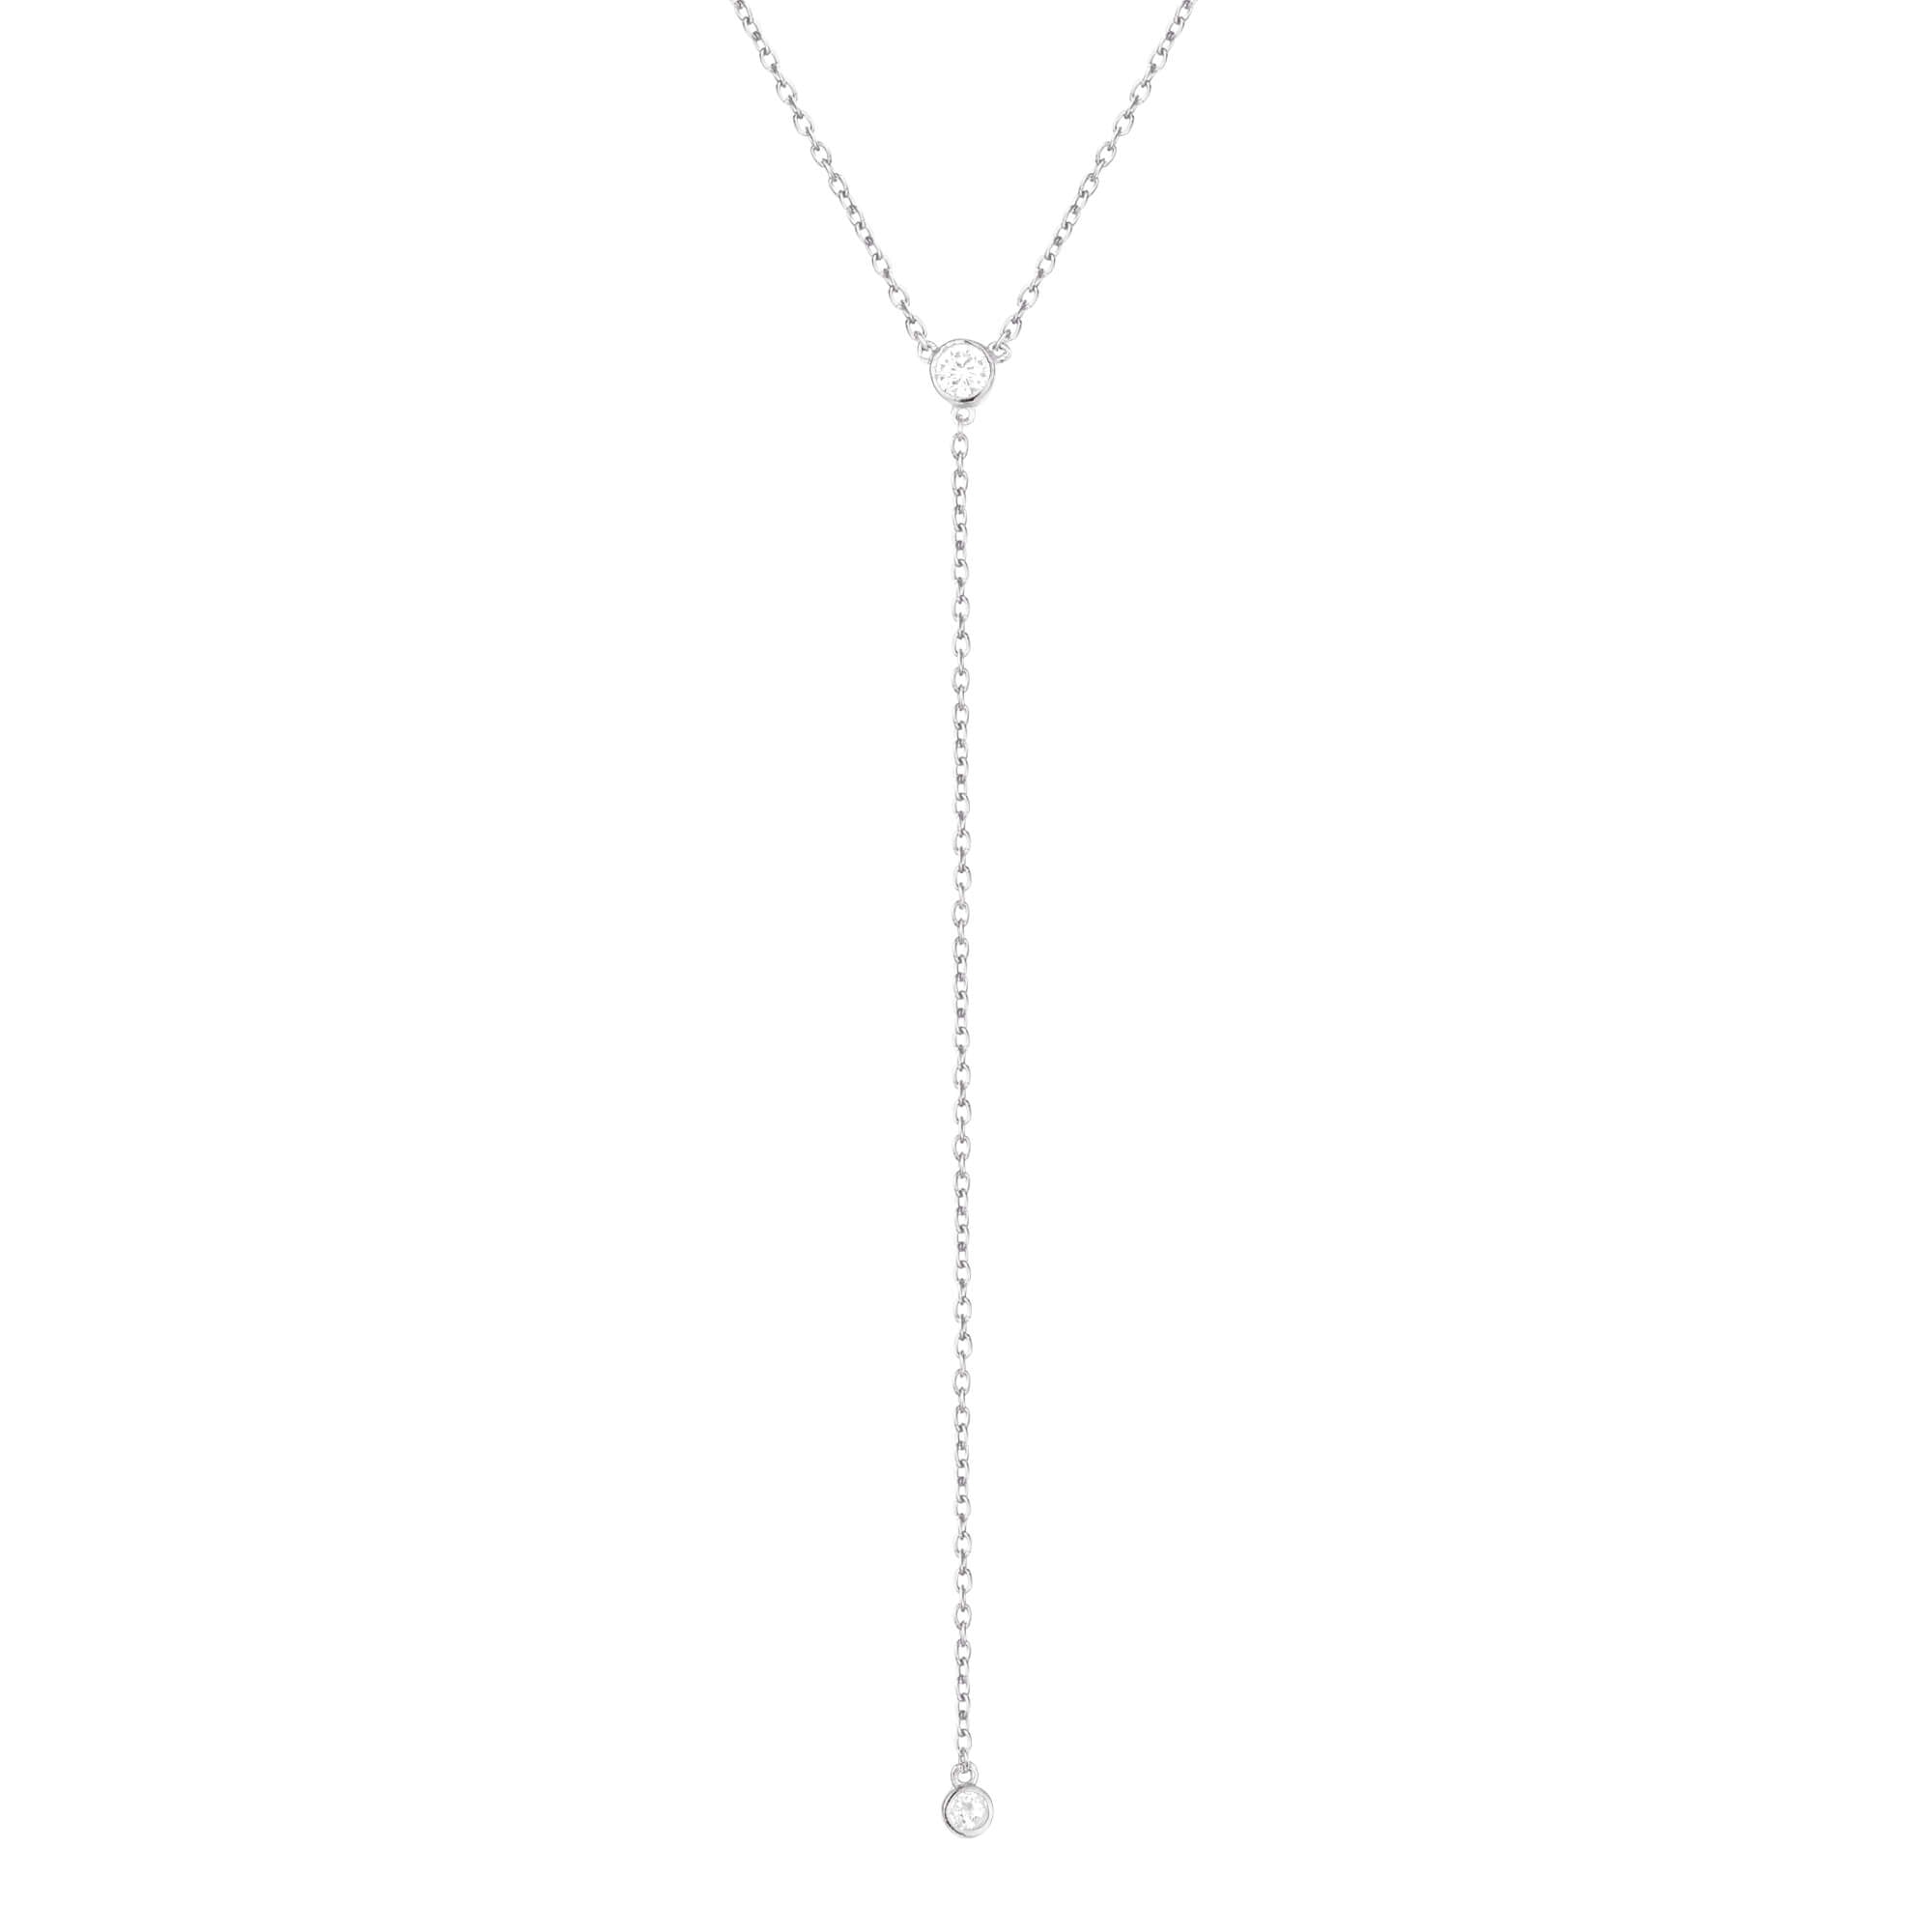 silver lariat necklace - seol gold